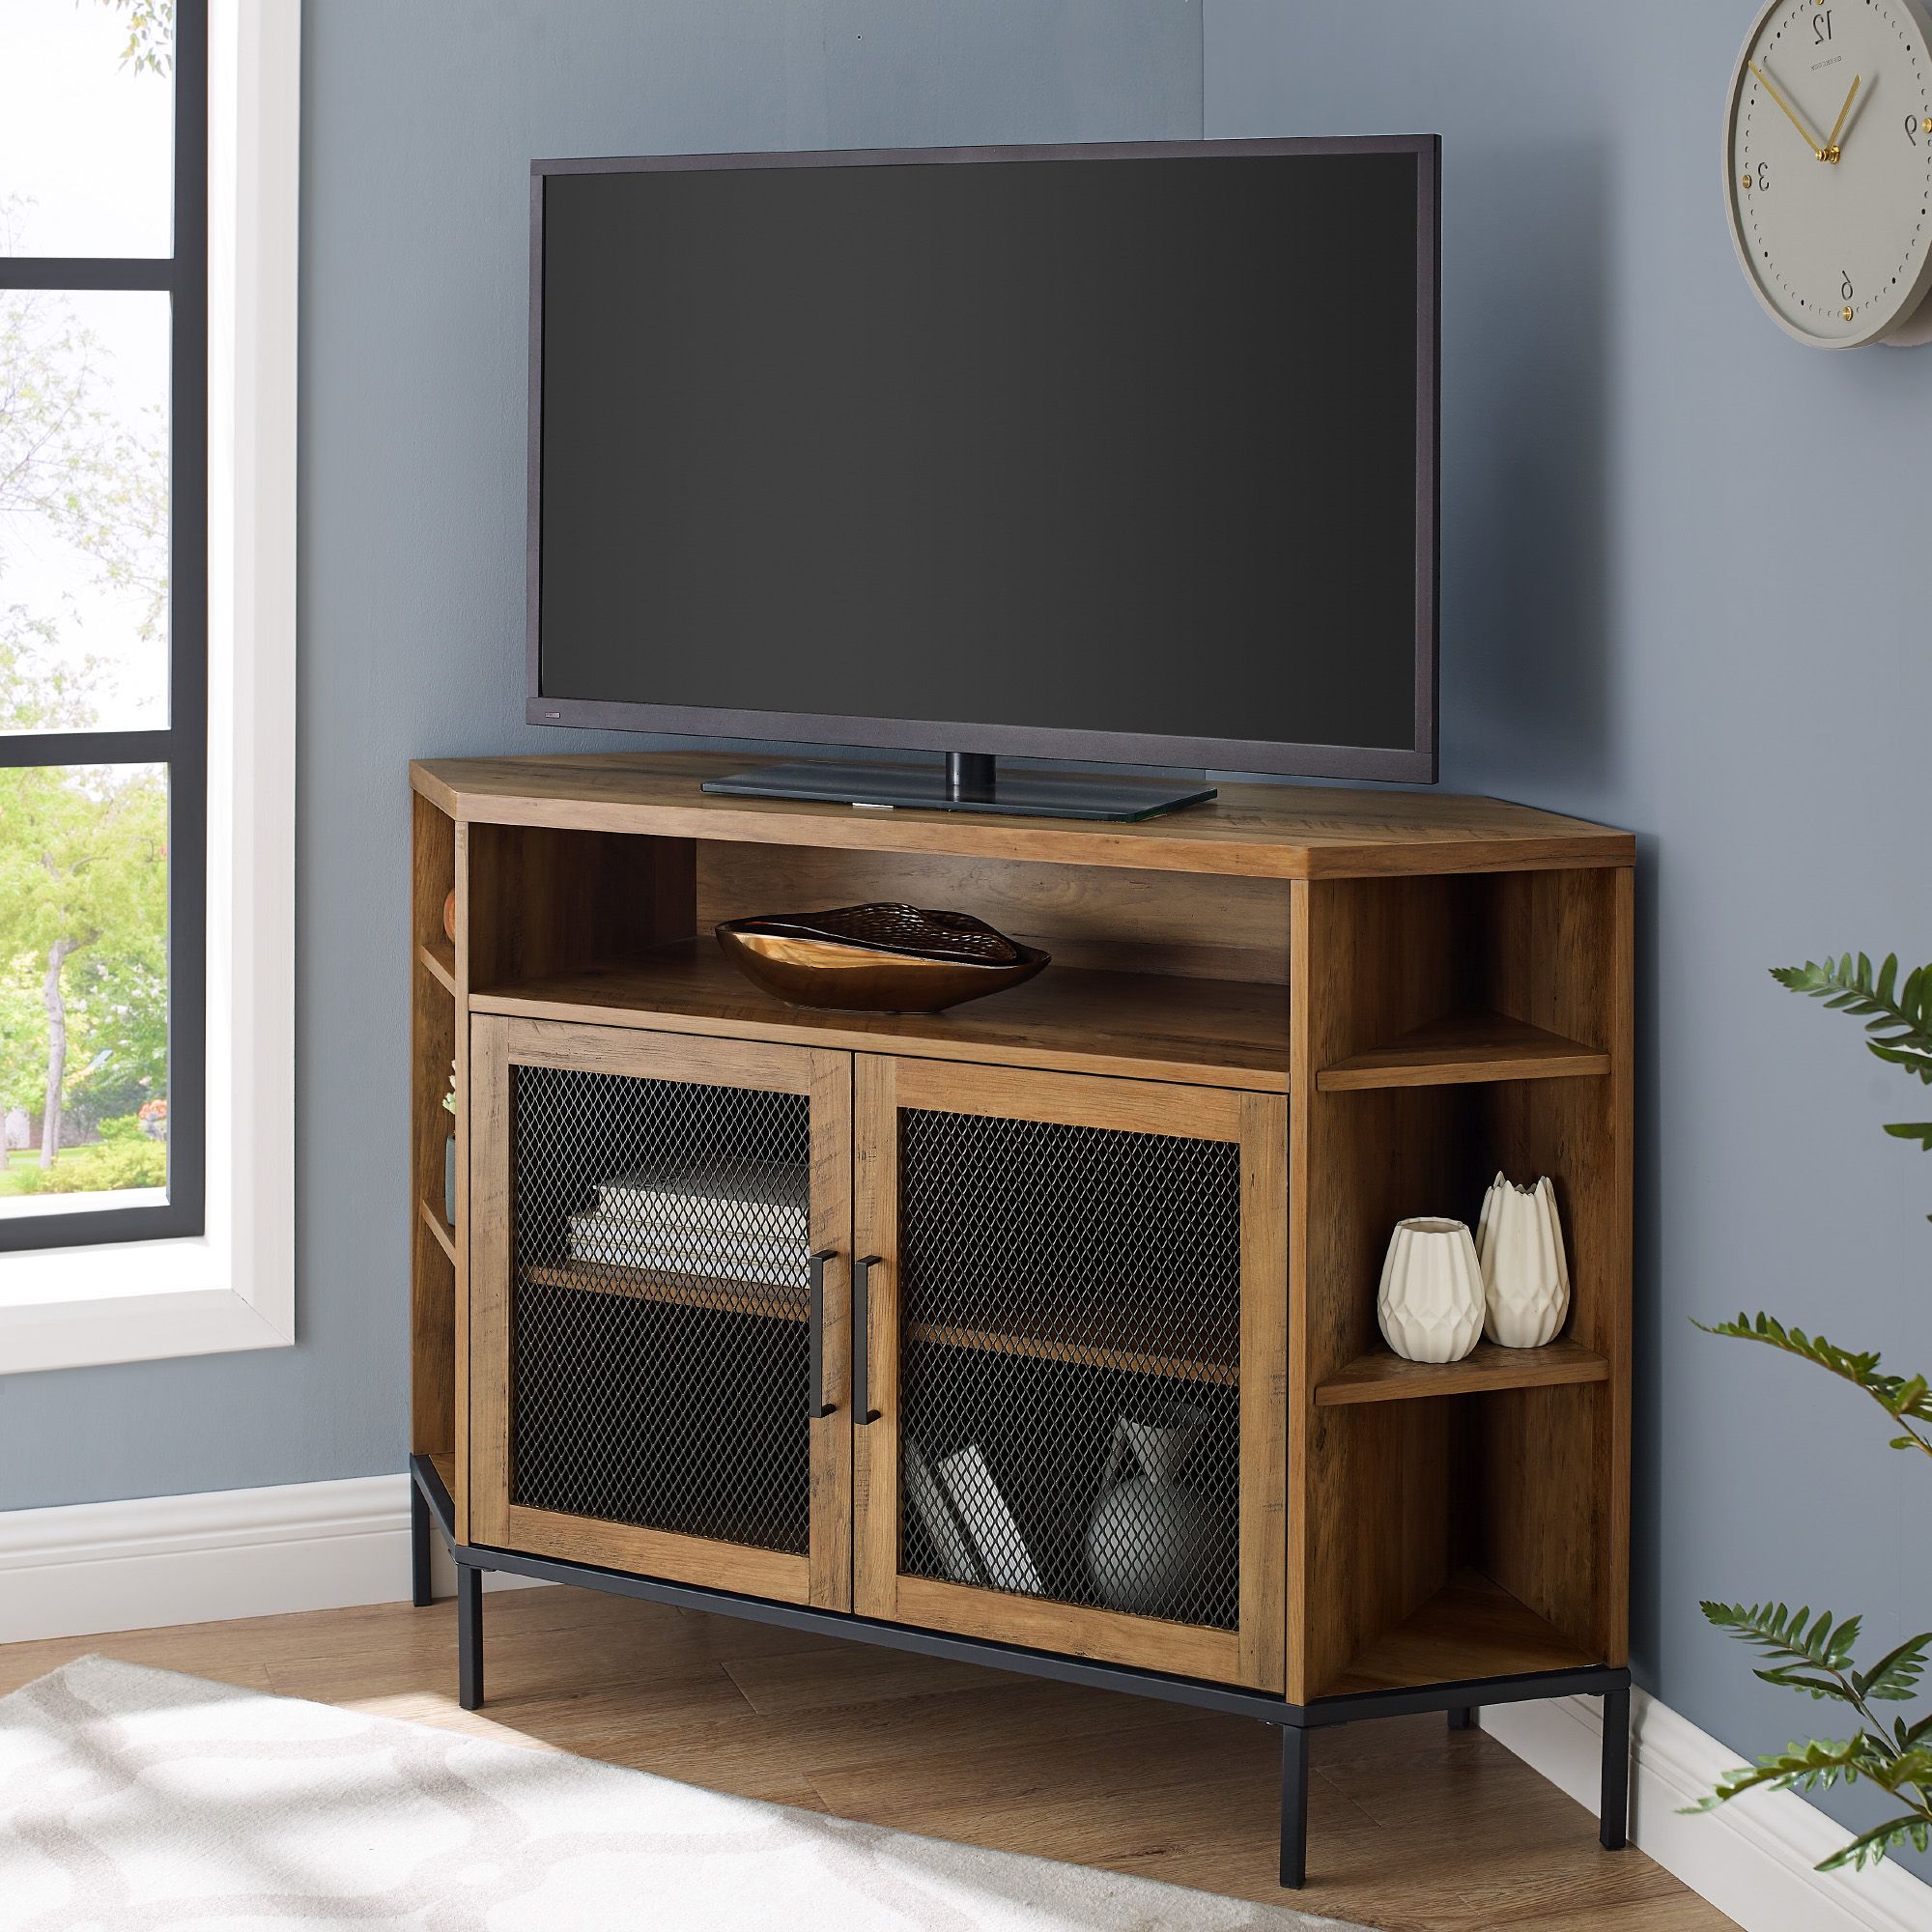 Manor Park 48 Inch Corner Tv Stand For Tvs Up To 55 Regarding Fashionable Corner Tv Stands For Tvs Up To 48" Mahogany (Photo 1 of 10)